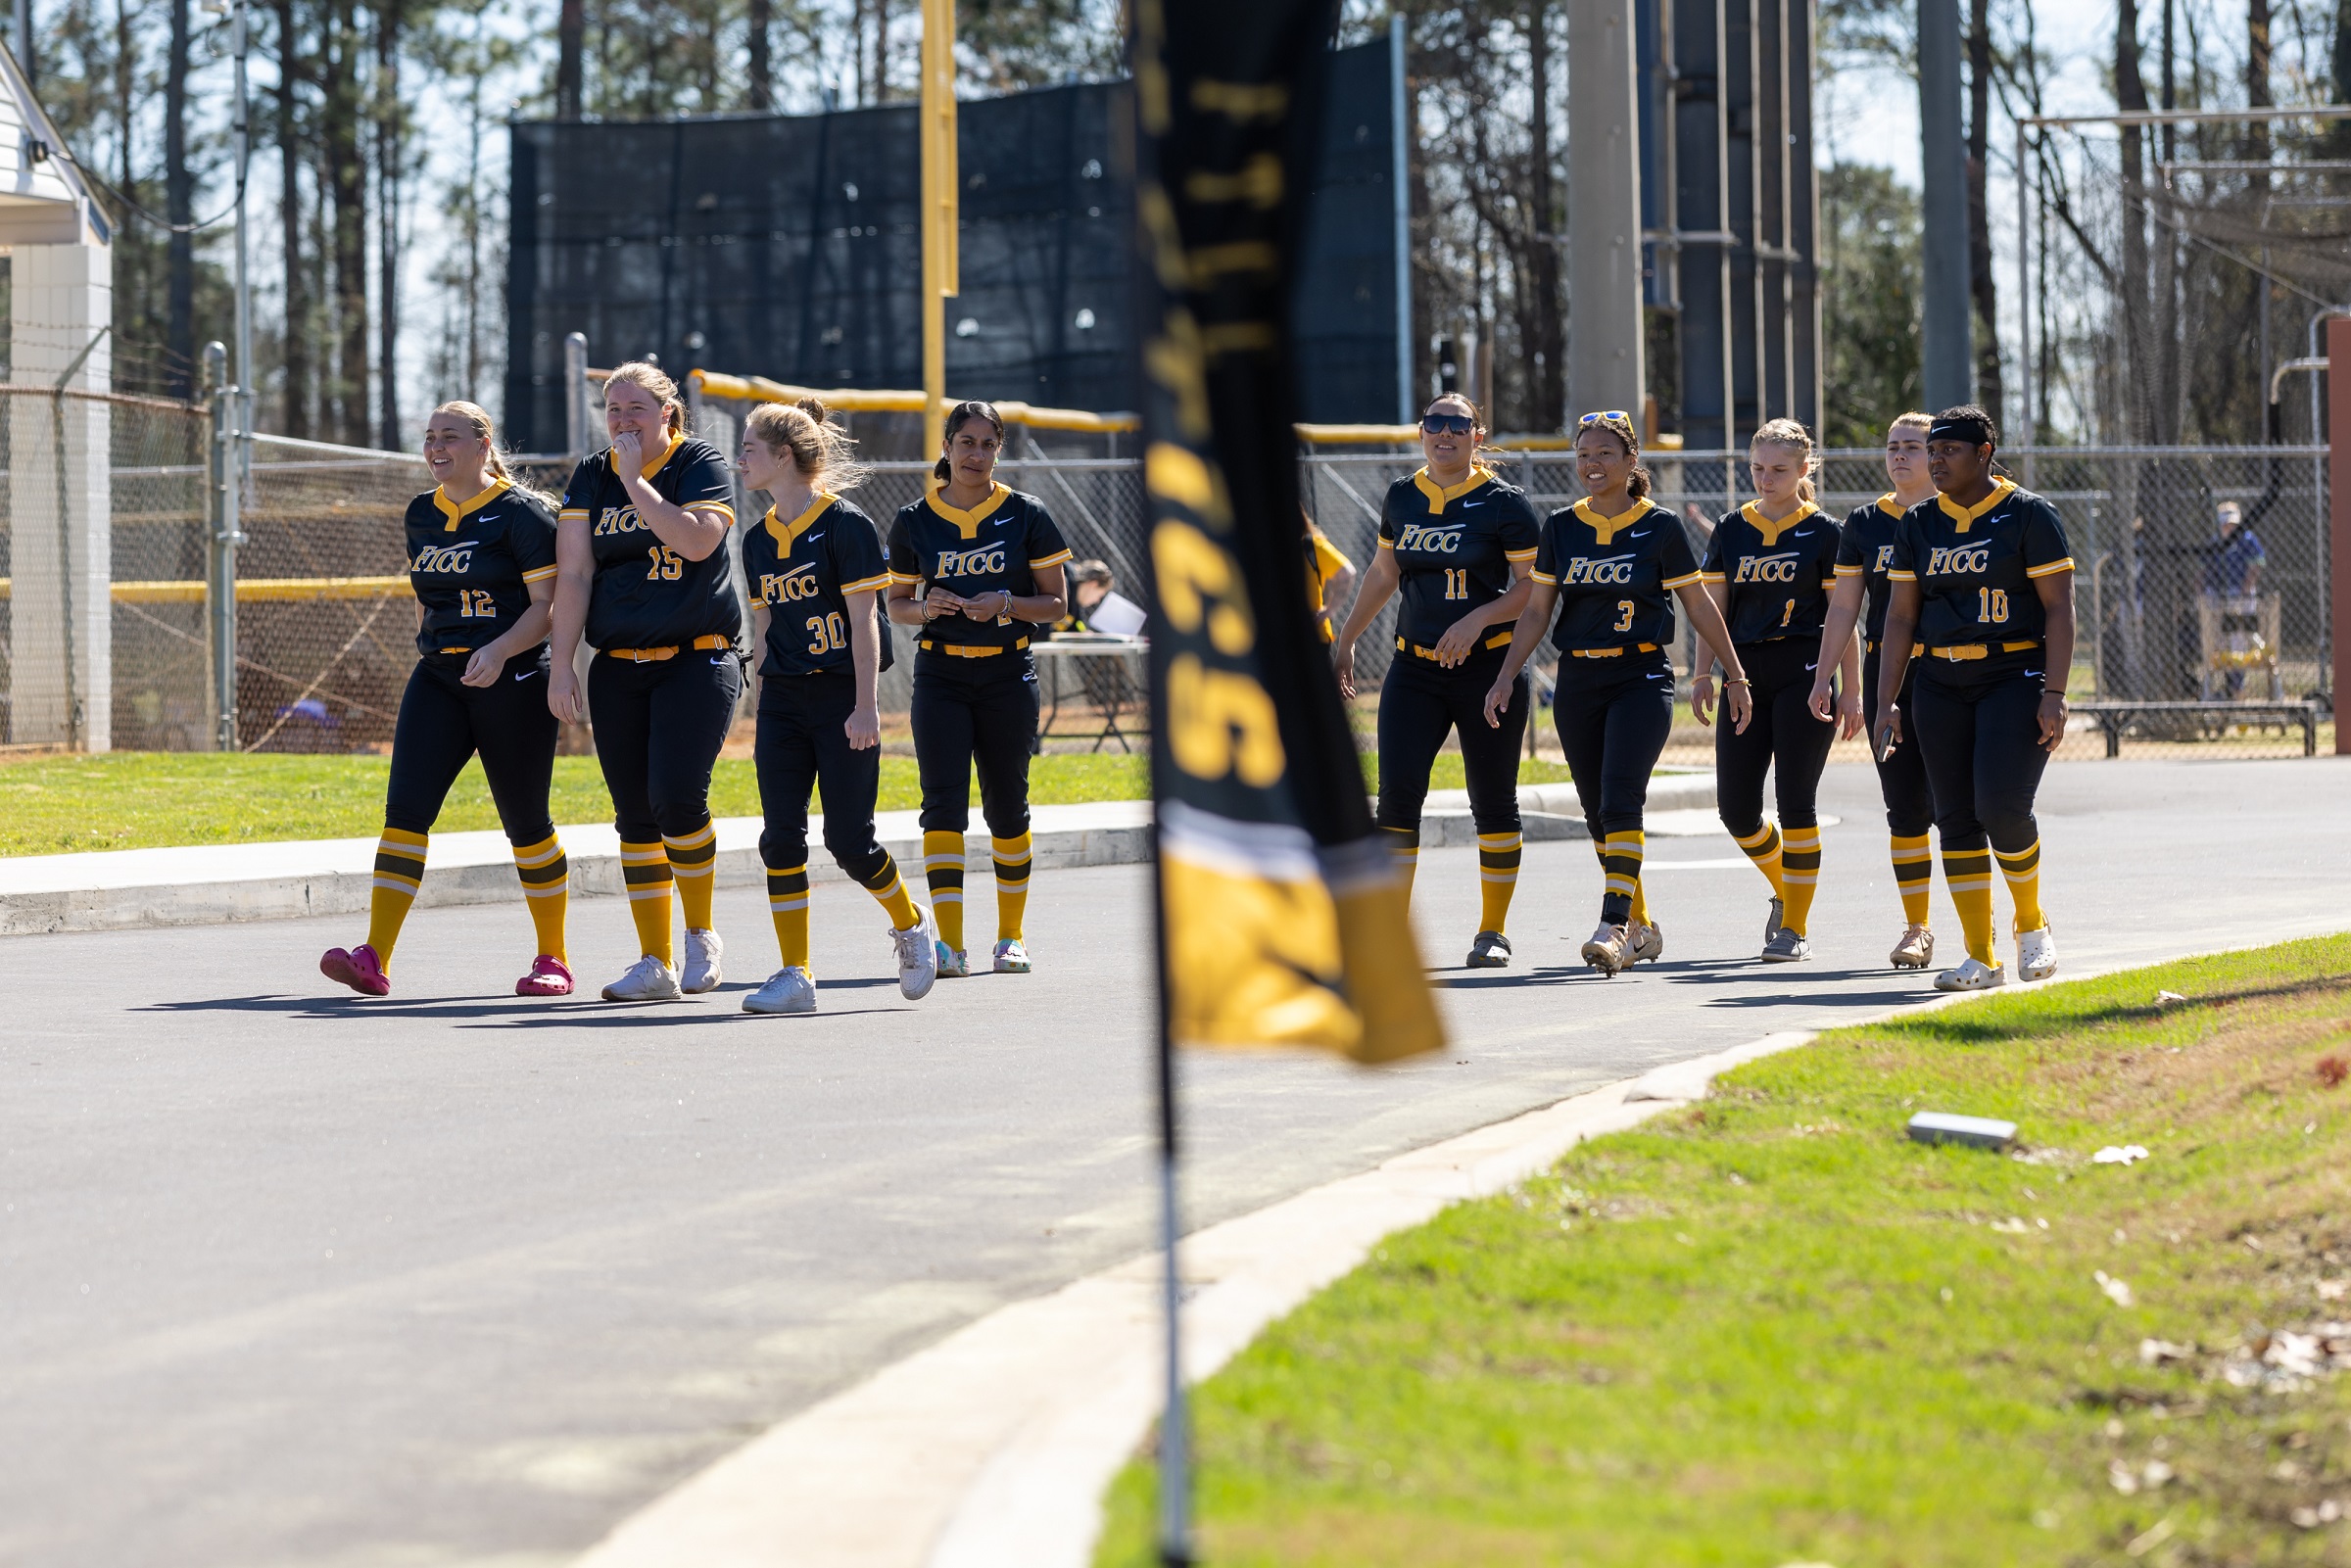 FTCC softball players walk up the path to the new softball field.